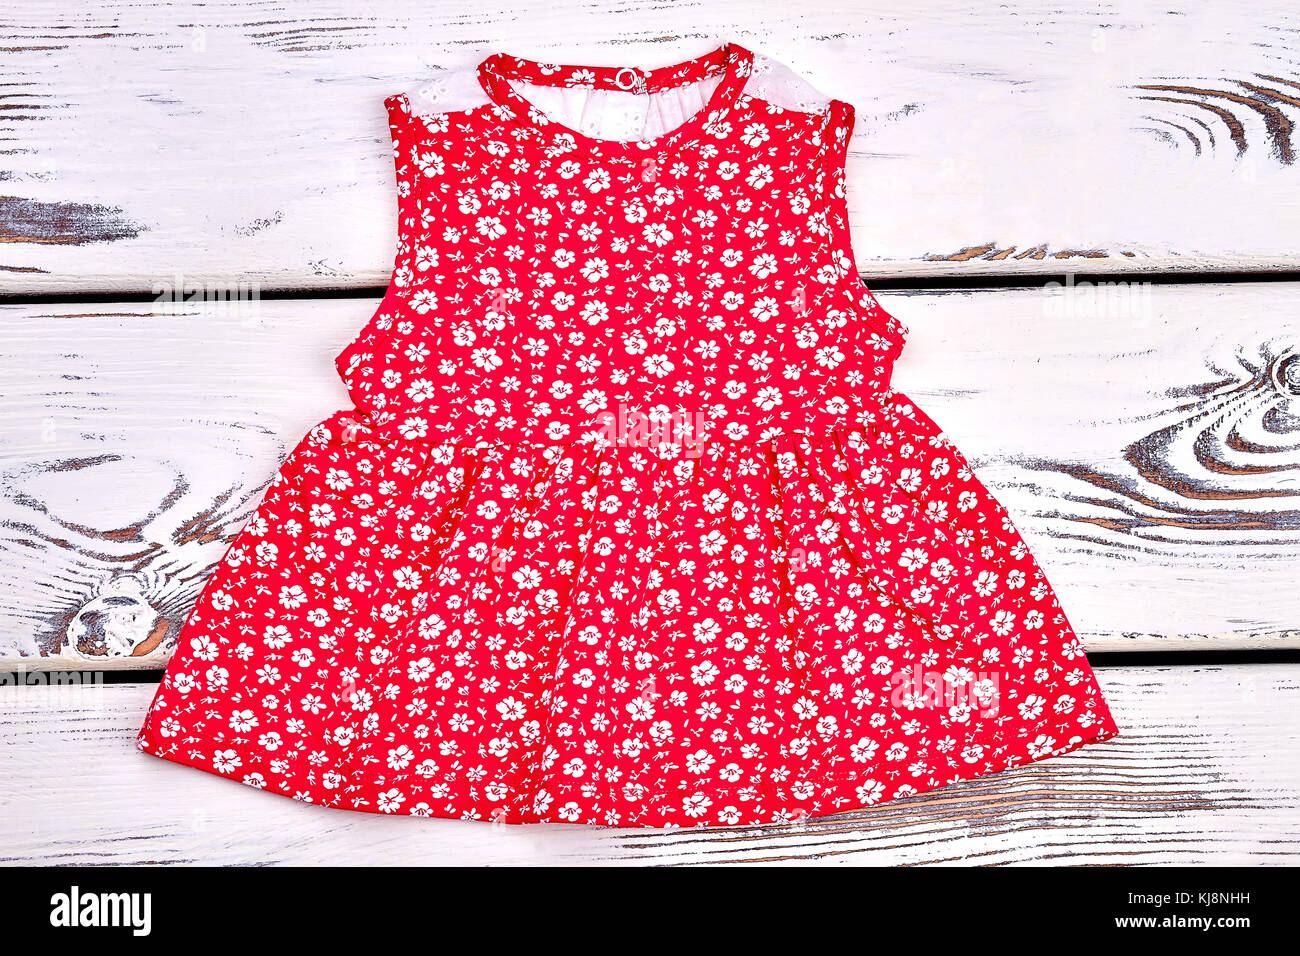 Red Dress With Small White Flowers ...